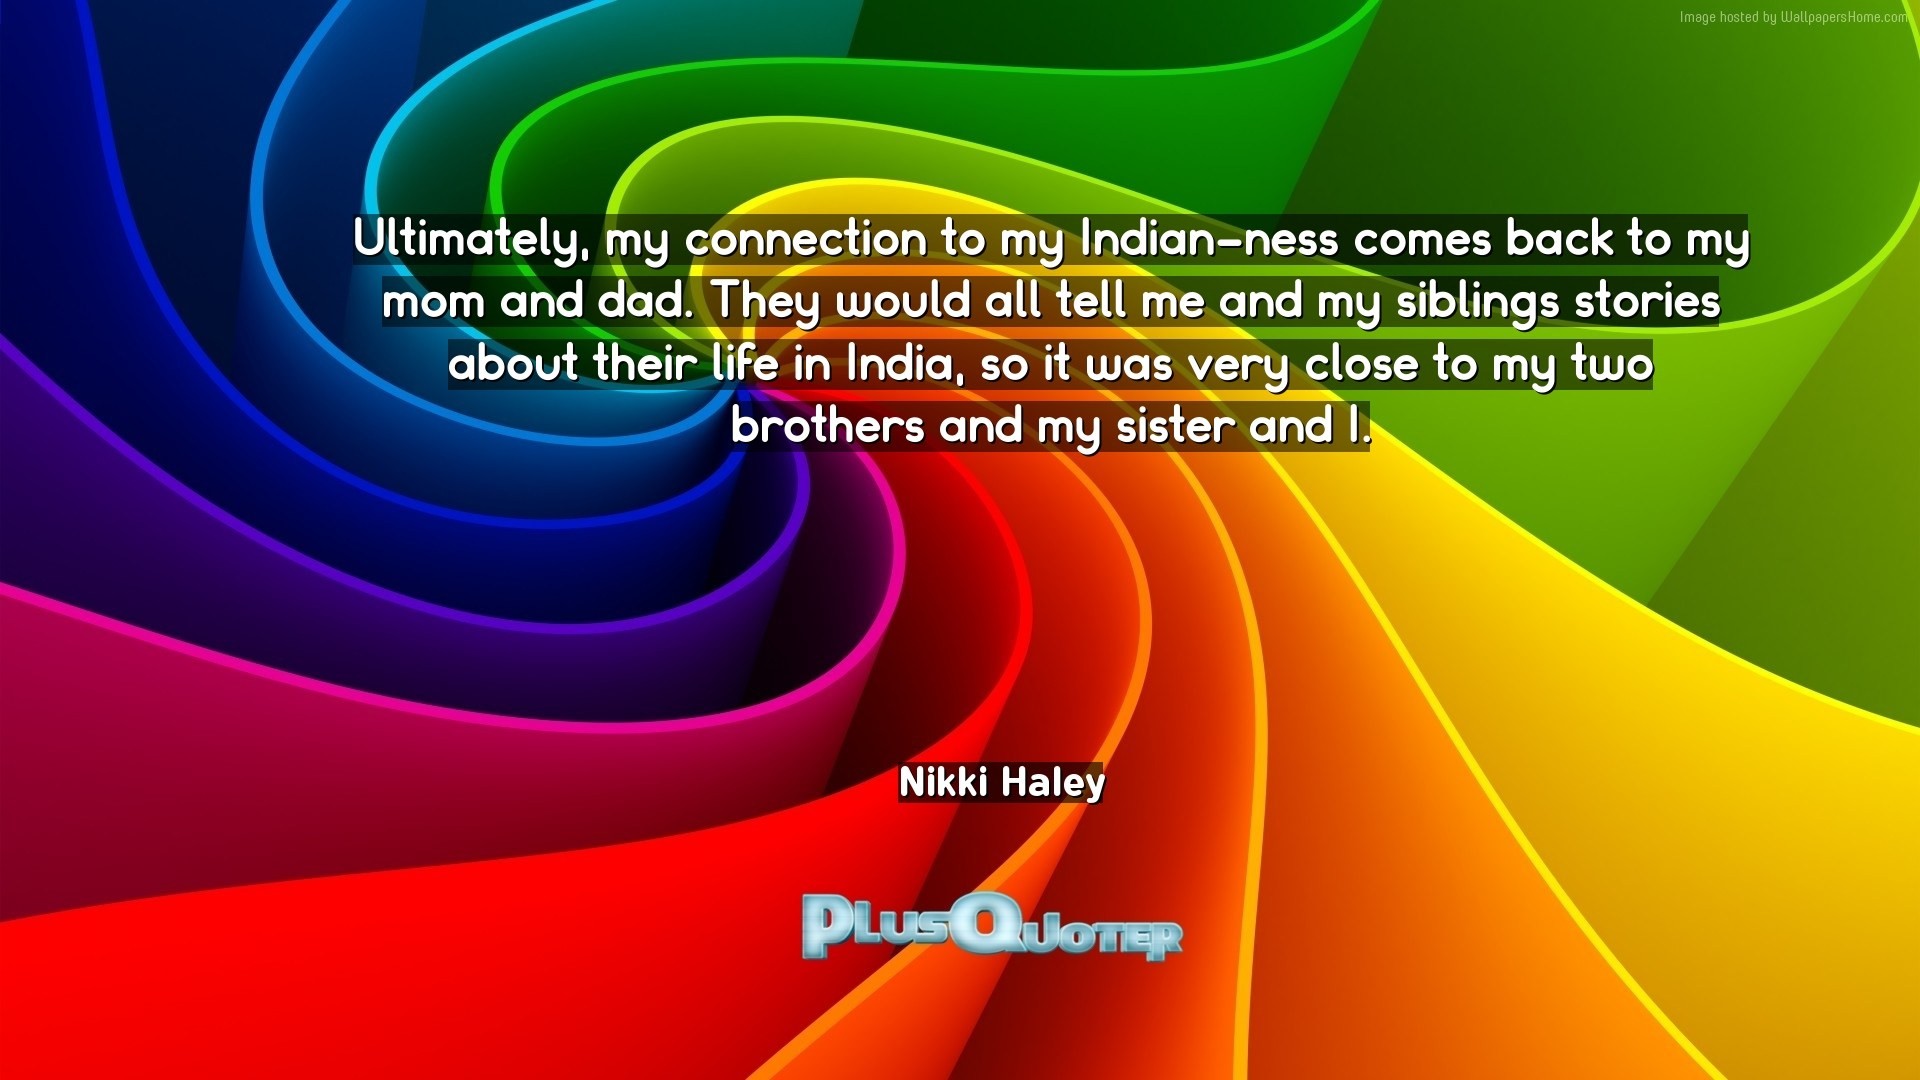 1920x1080 Download Wallpaper with inspirational Quotes- "Ultimately, my connection to  my Indian-ness